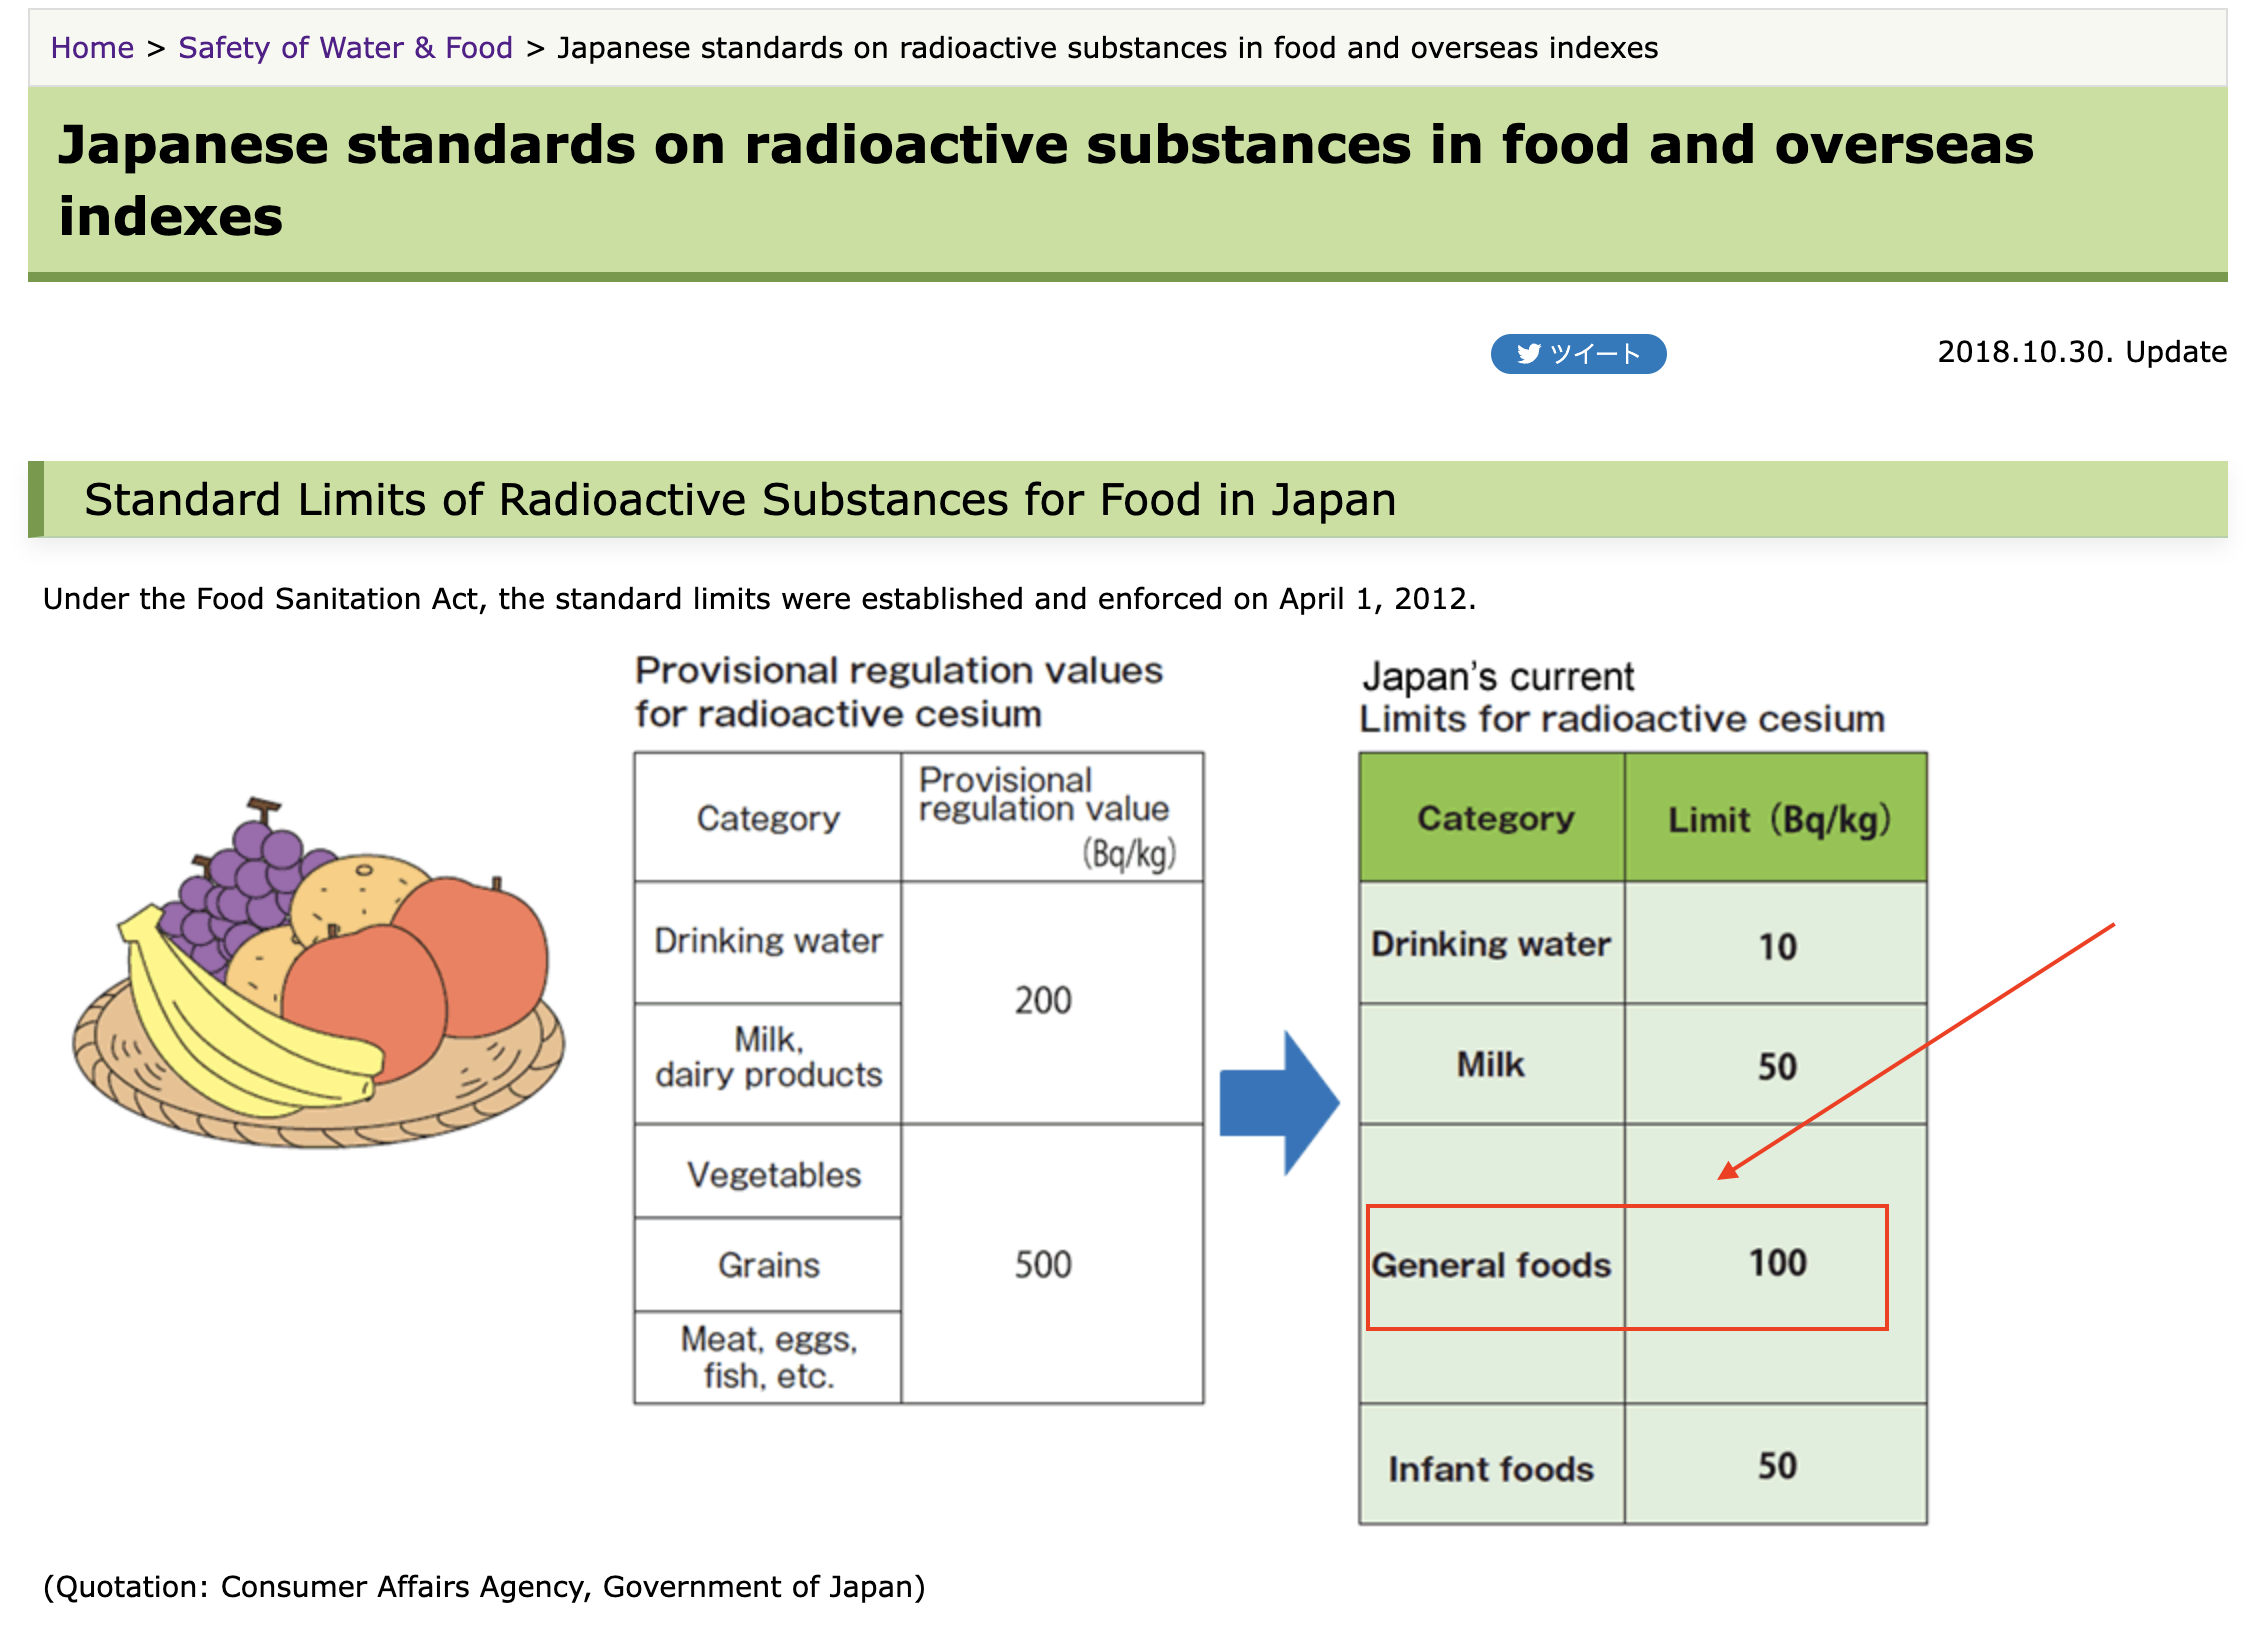 Screenshot of Standard limits of radioactive substances for food in Japan, obtained from the website of Fukushima Revitalization Station run by Japan's Fukushima prefectural government. /CGTN